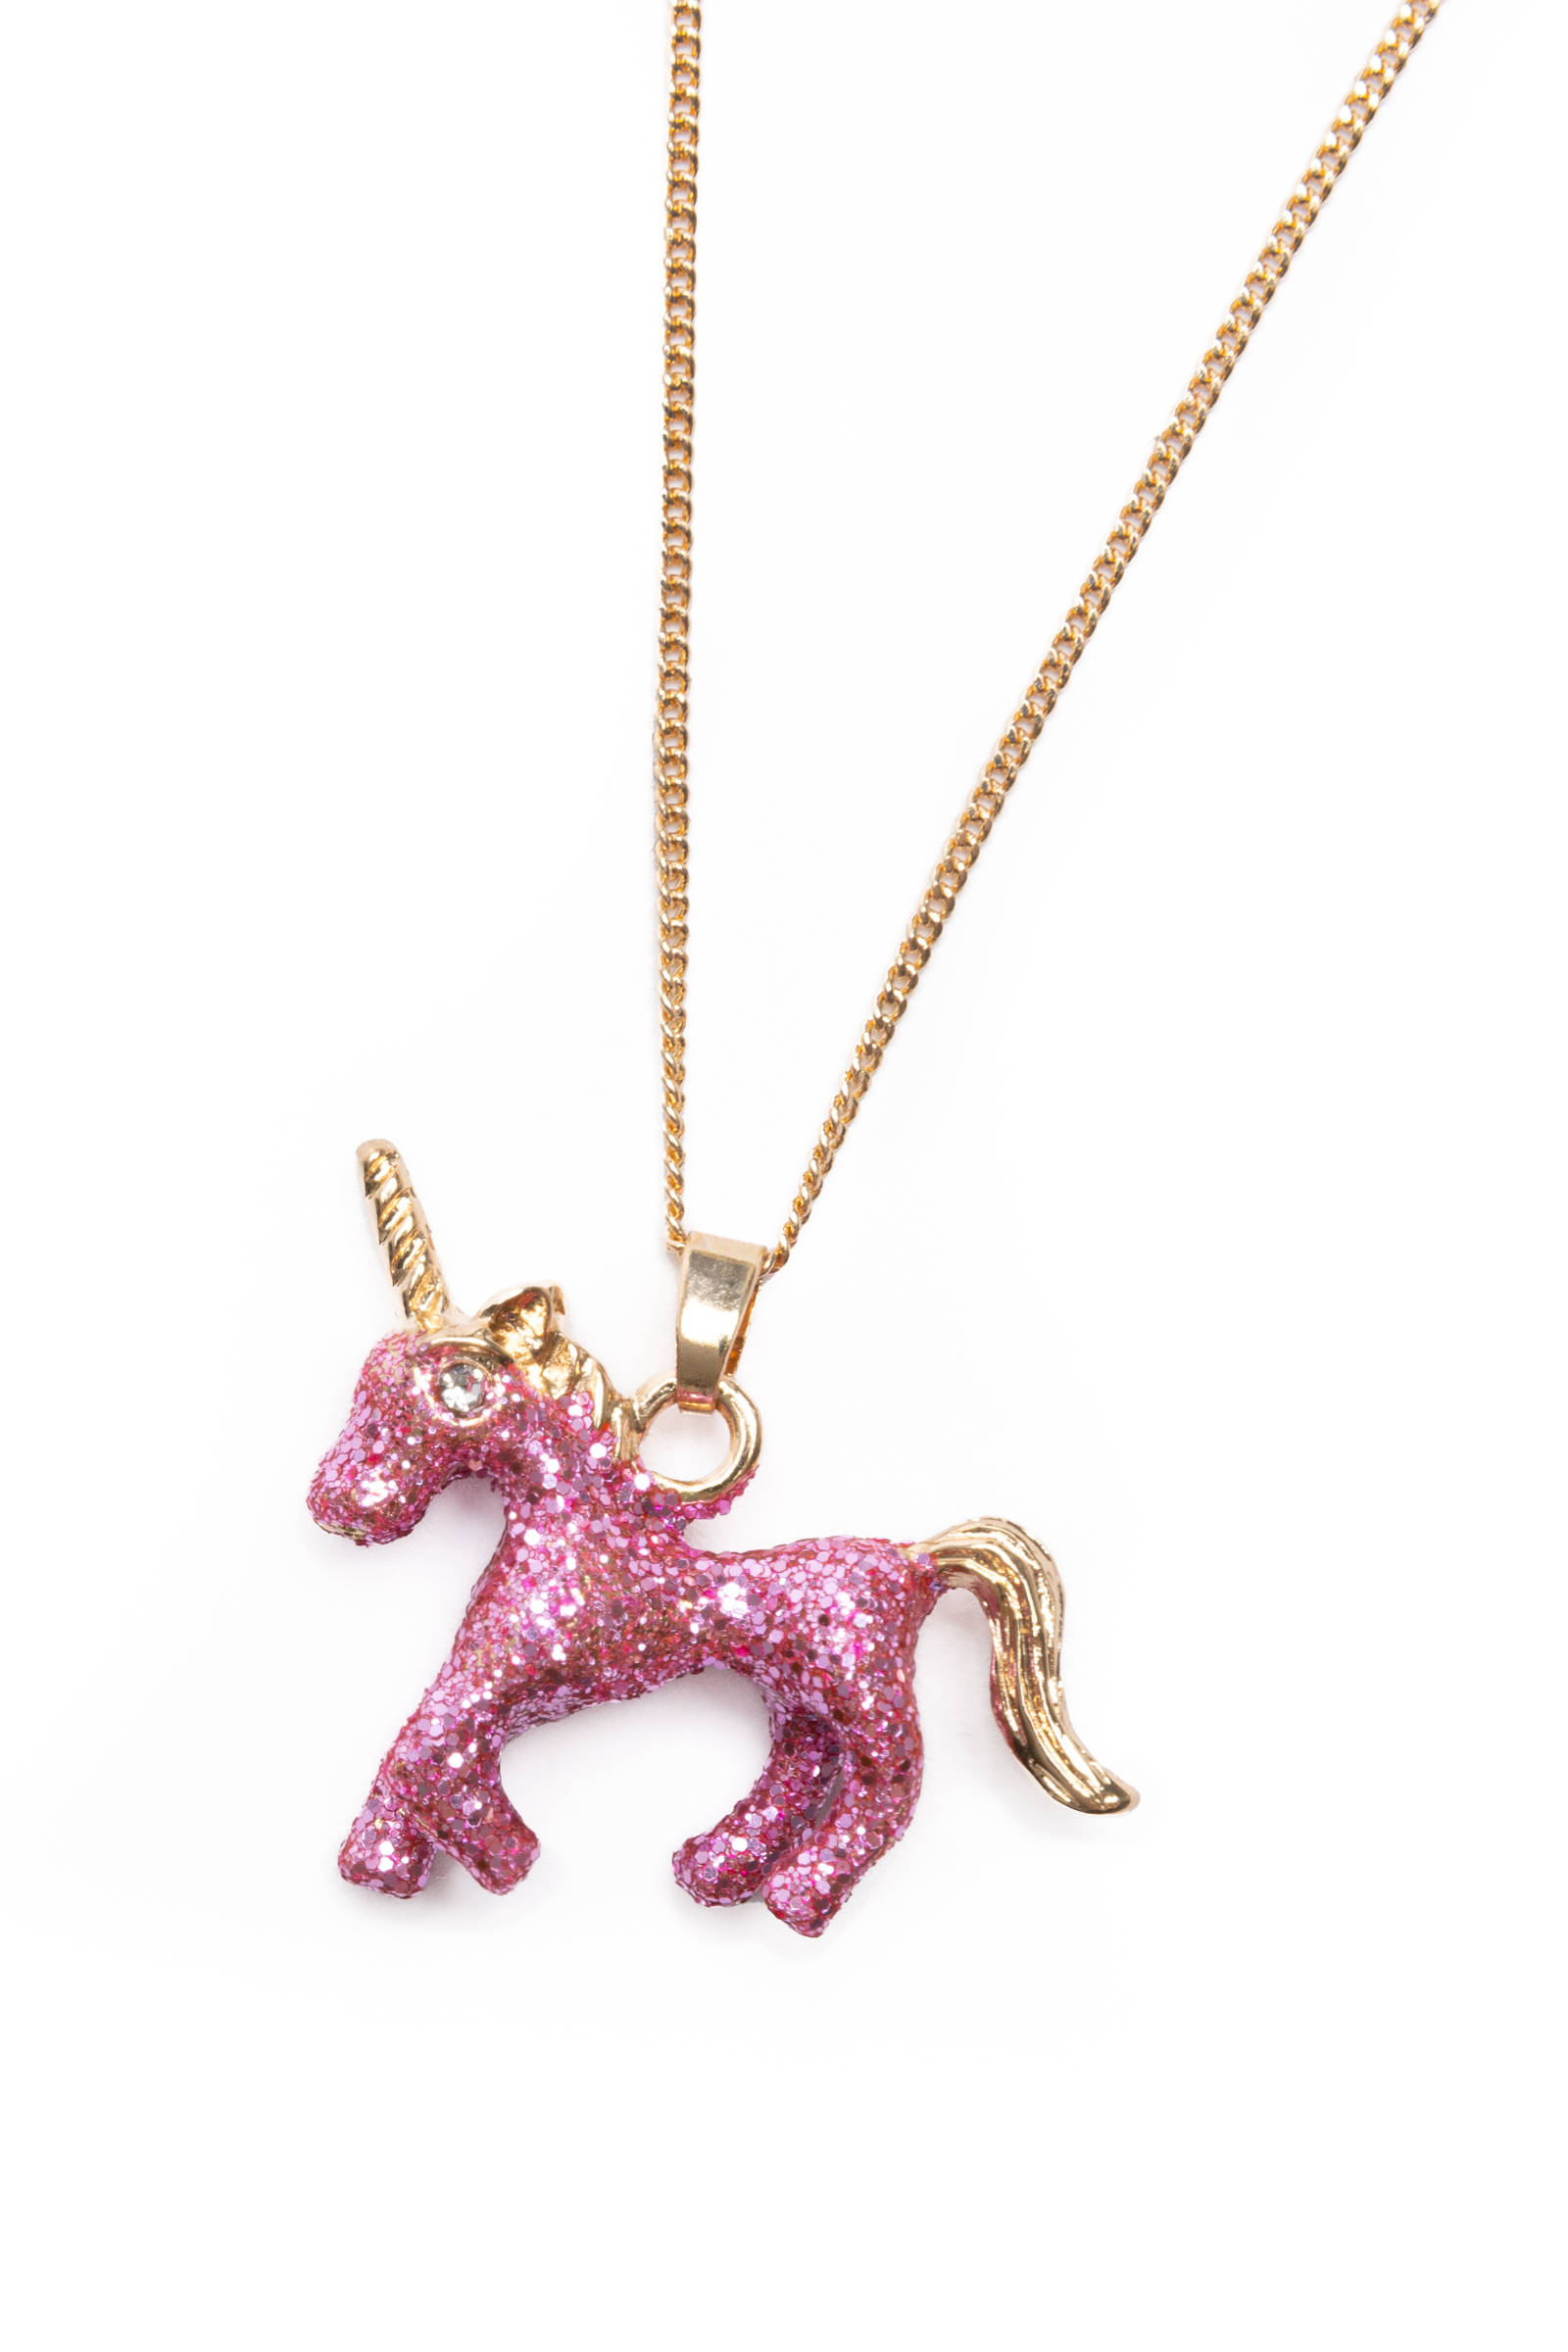 1pc Elegant And Fashionable Silver-colored Zinc Alloy Unicorn Necklace With  Rainbow Colored Details Suitable For Birthday, Party, Anniversary As Gift |  SHEIN